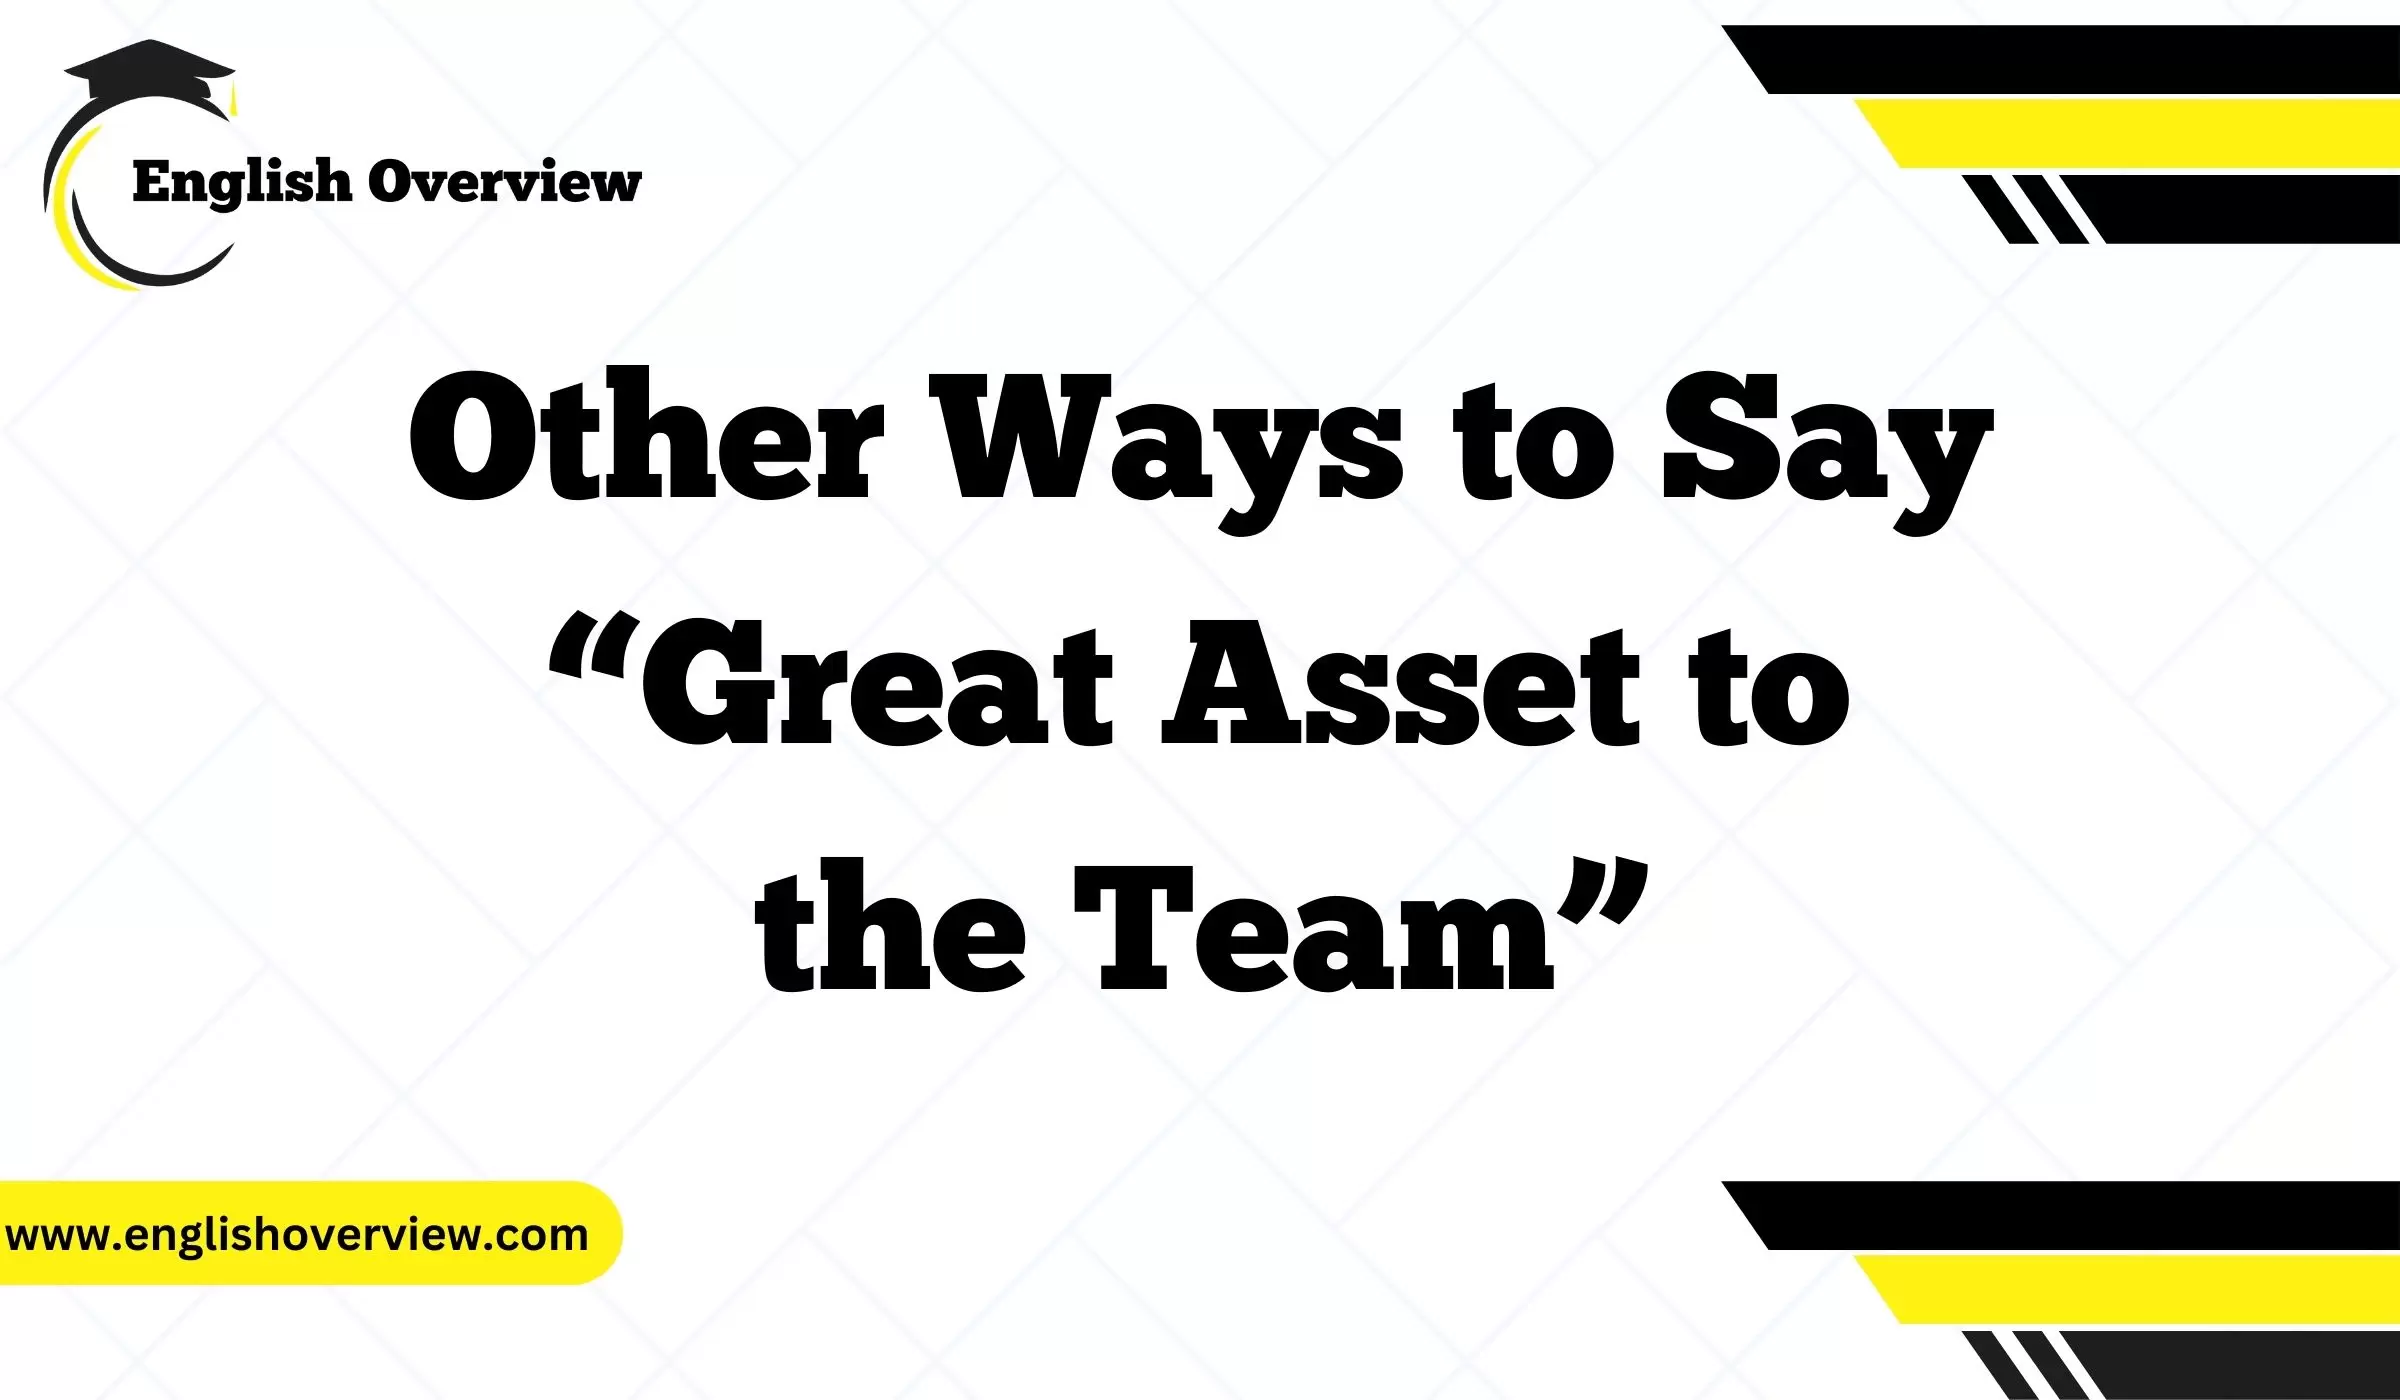 Other Ways to Say “Great Asset to the Team”